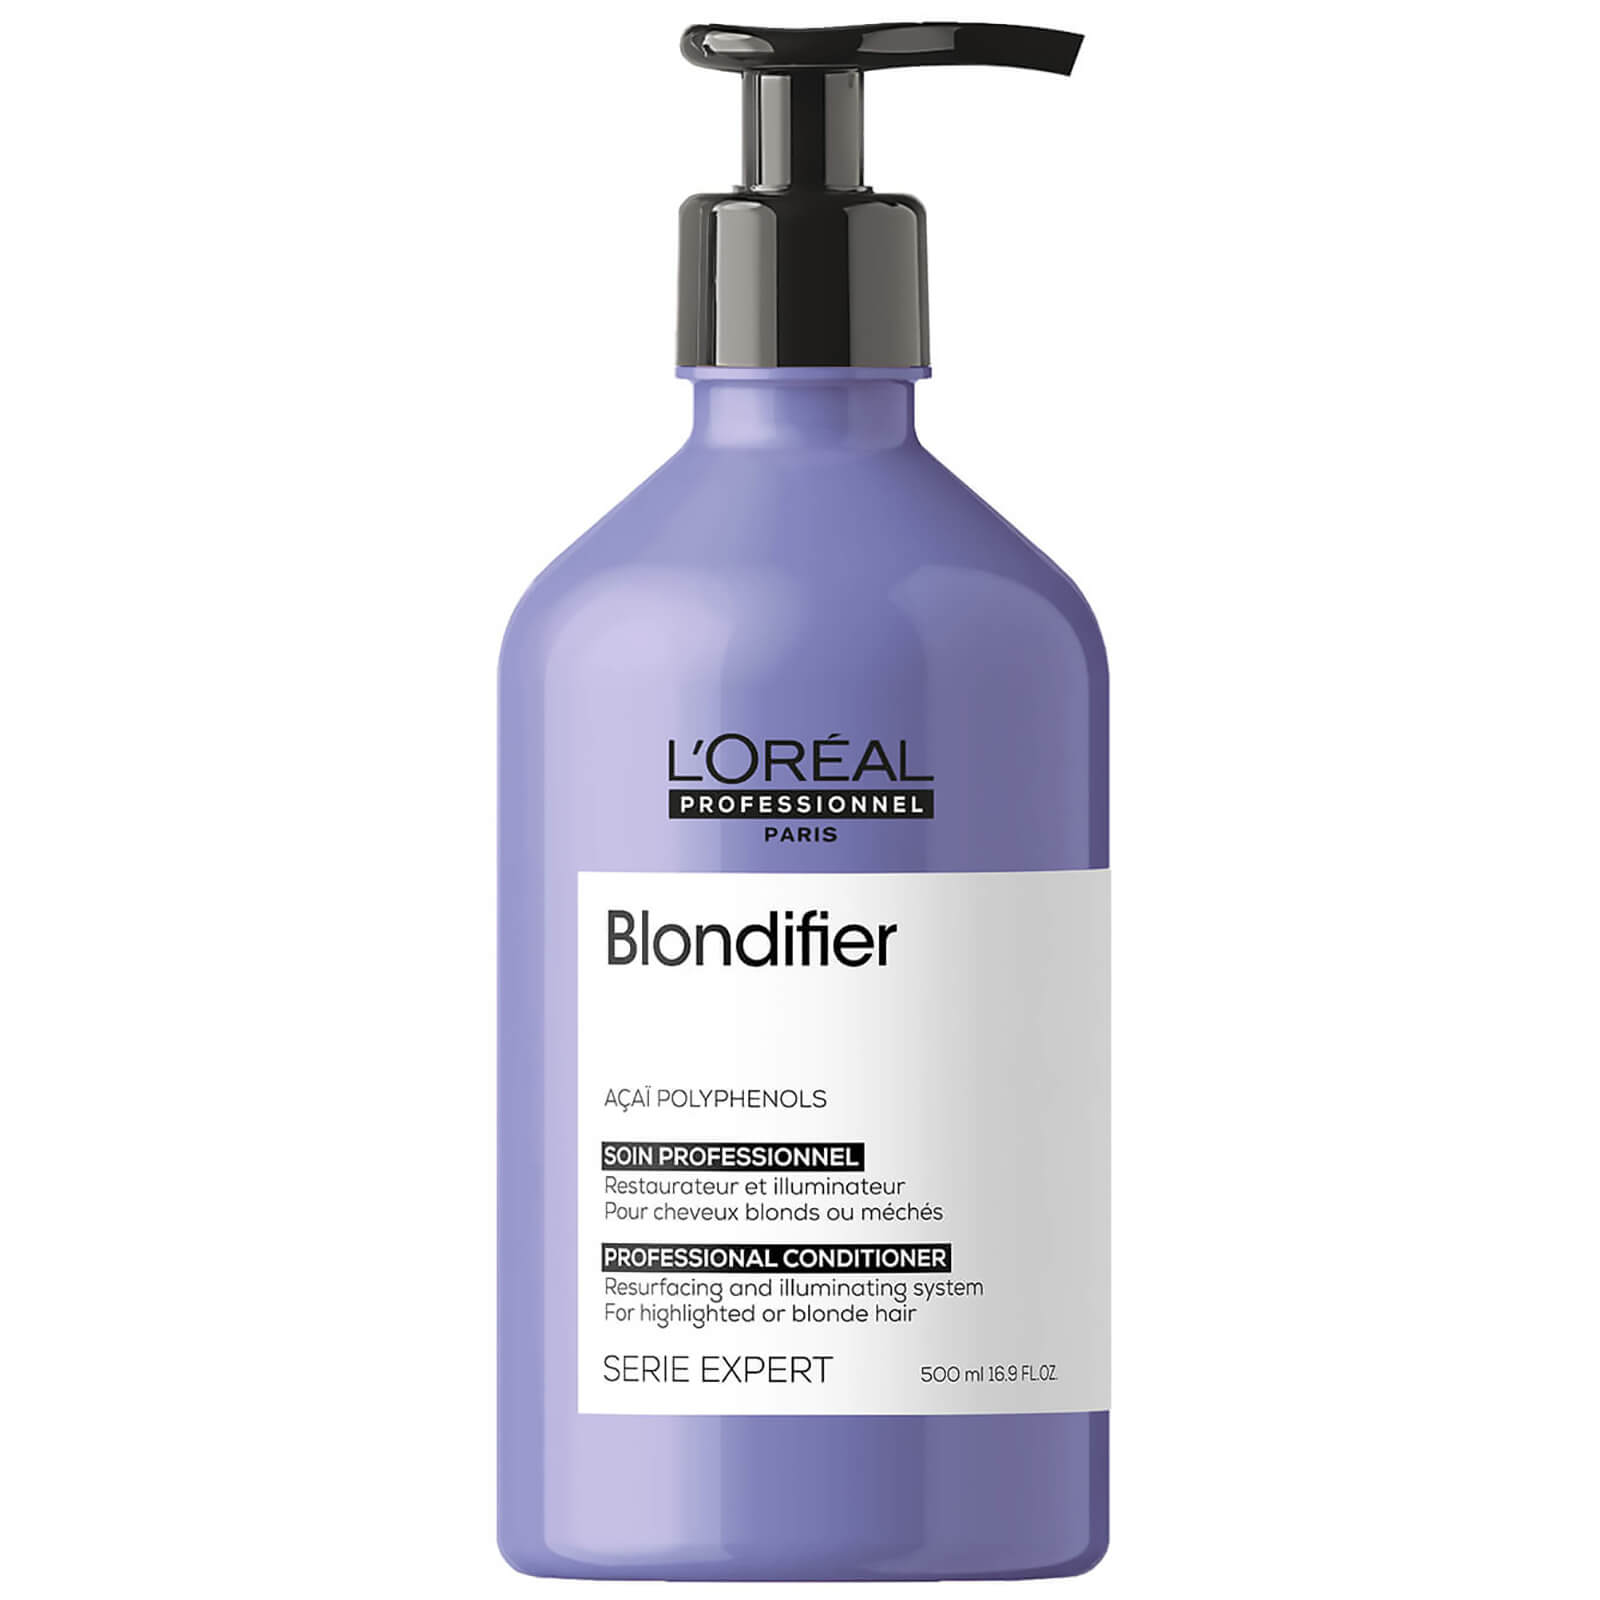 L'Oreal Professionnel Serie Expert Blondifier Conditioner for Highlighted or Blonde Hair 500ml